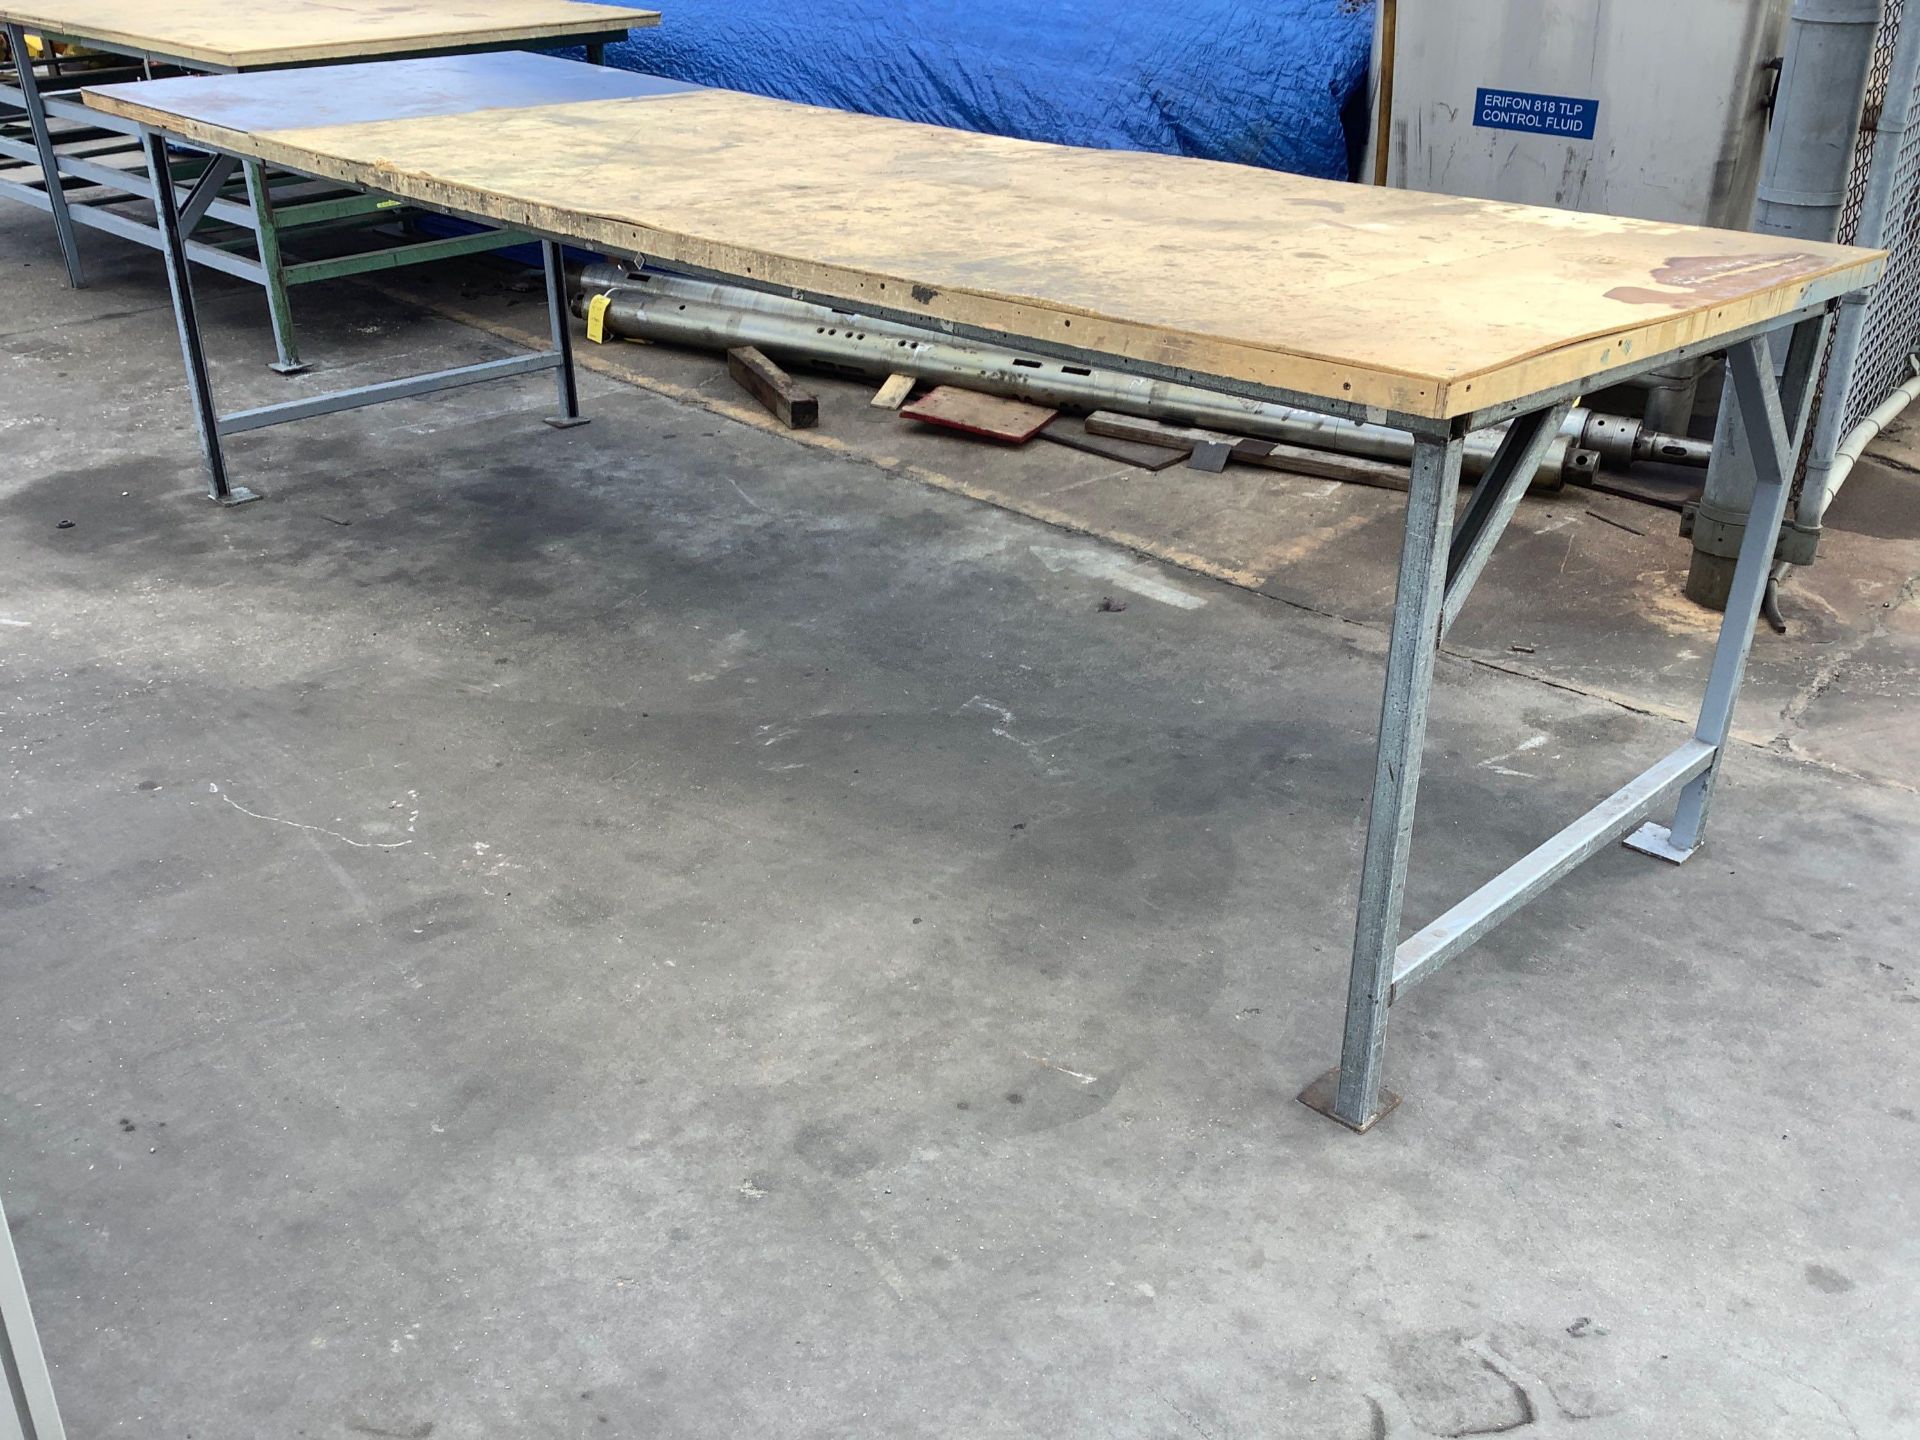 4' x 12' Steel Frame Table, content on or under NOT included,